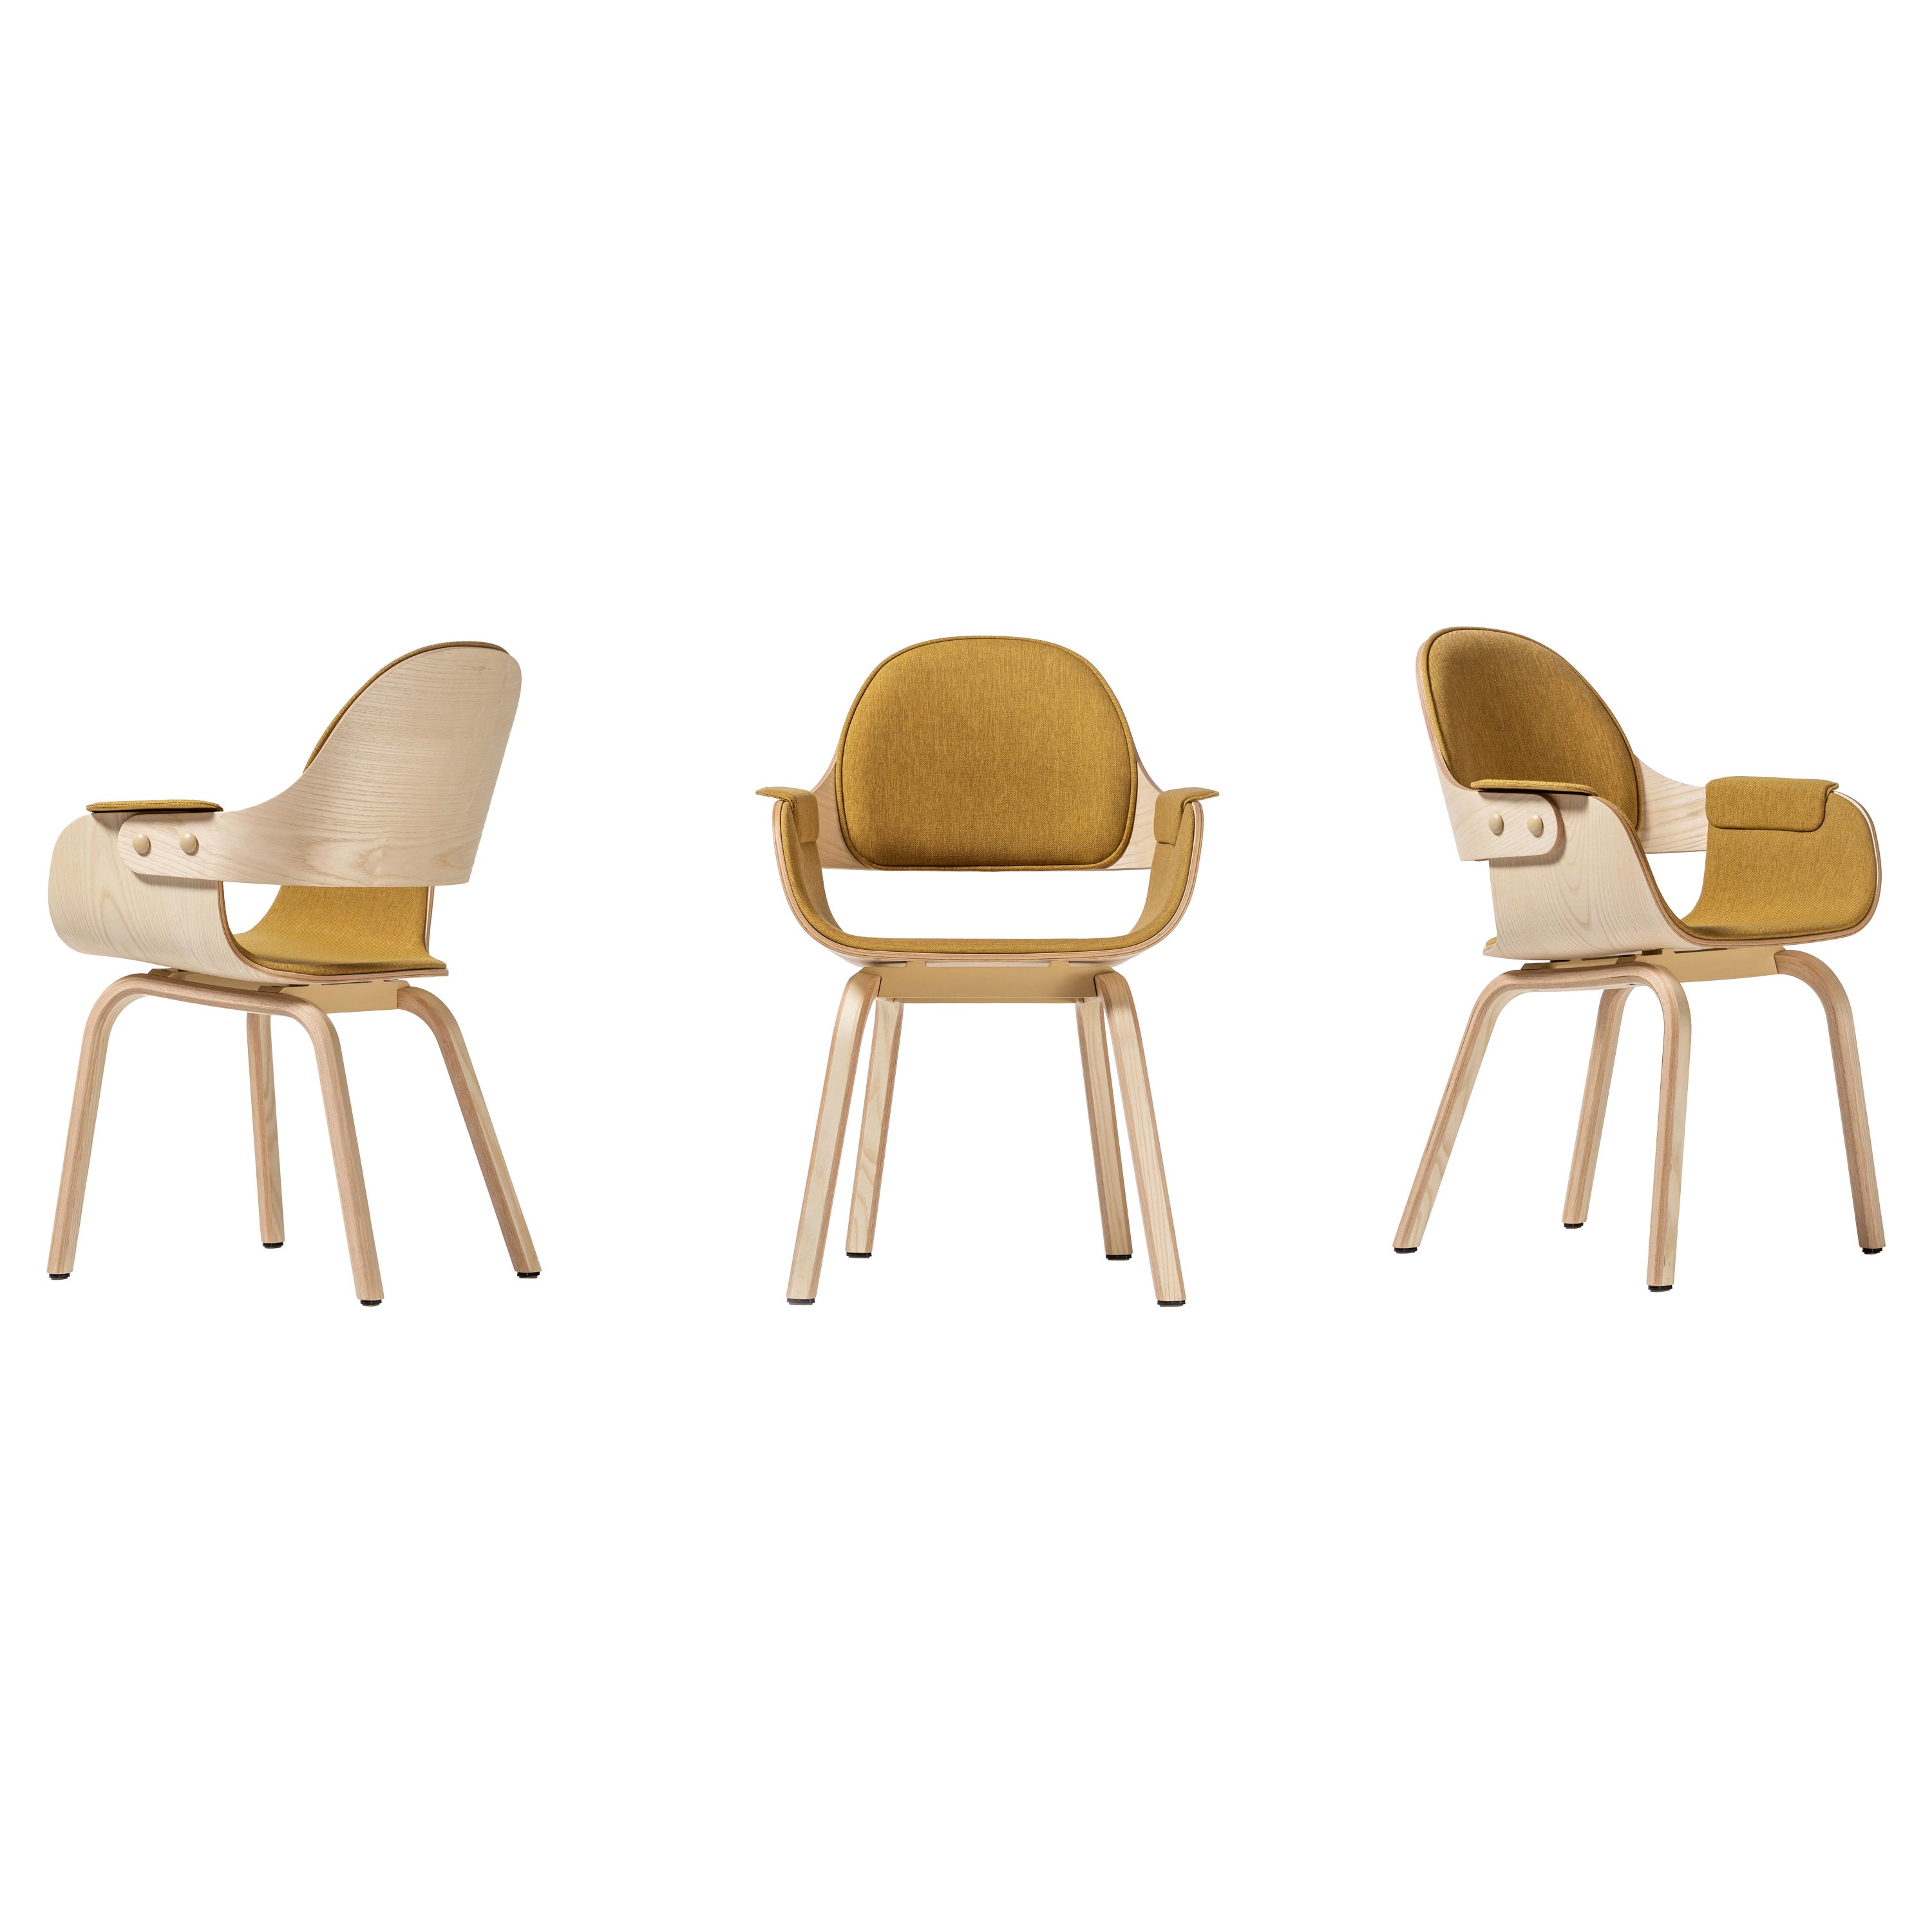 Set of 3 Wooden Legs Showtime Chair by Jaime Hayon For Sale